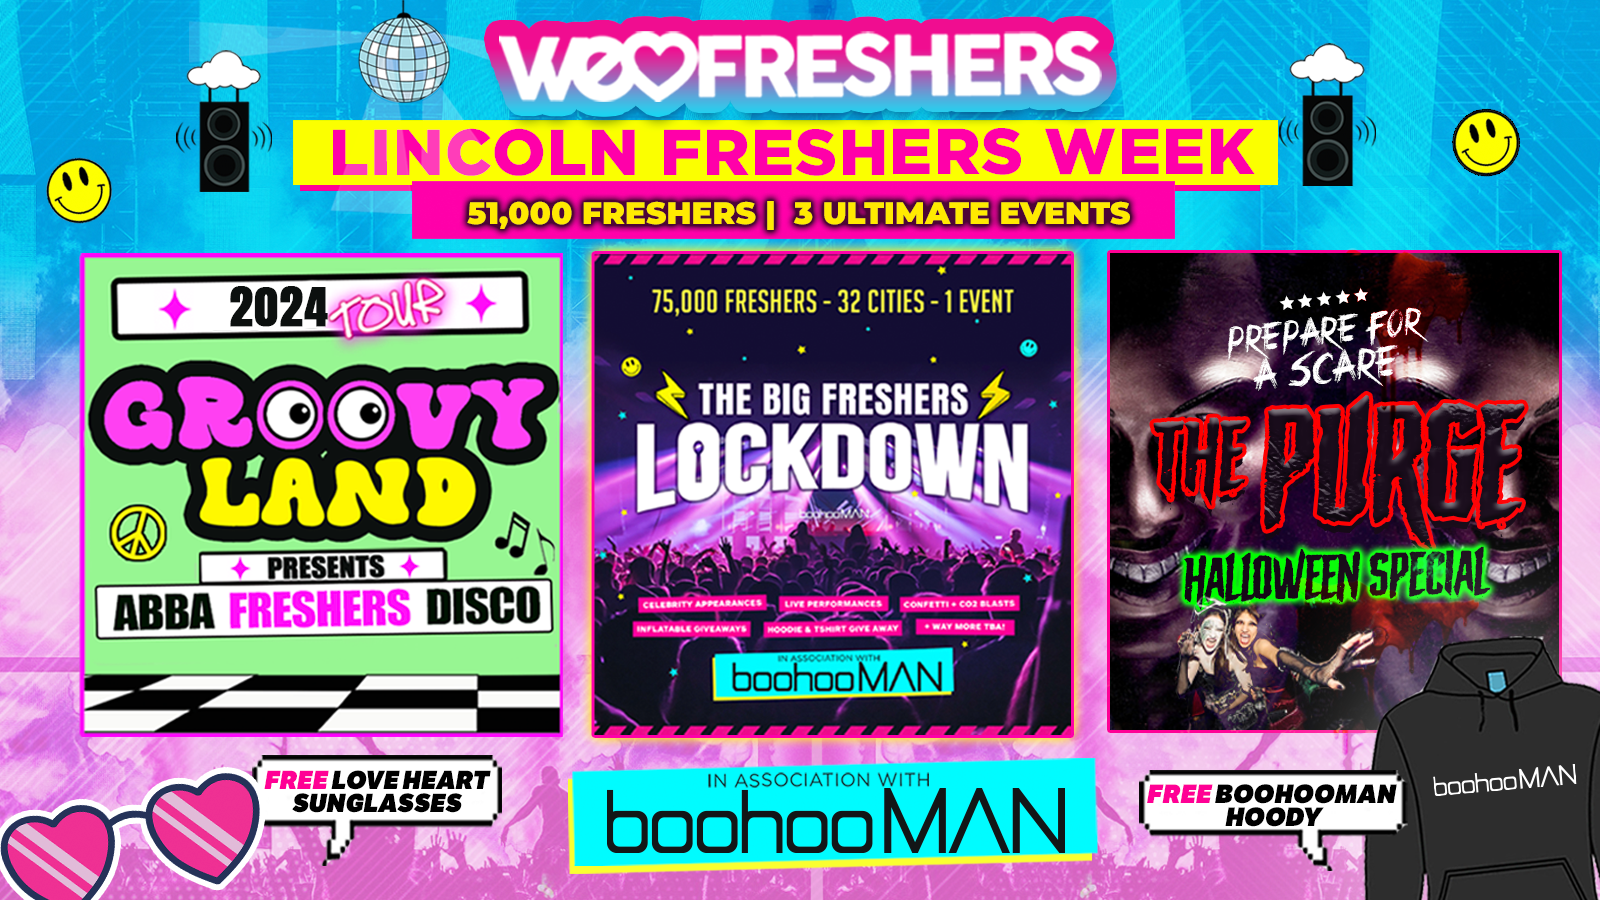 WE LOVE LINCOLN FRESHERS 2024 in association with boohooMAN ❗FREE BOOHOOMAN HOODIE TODAY ONLY❗